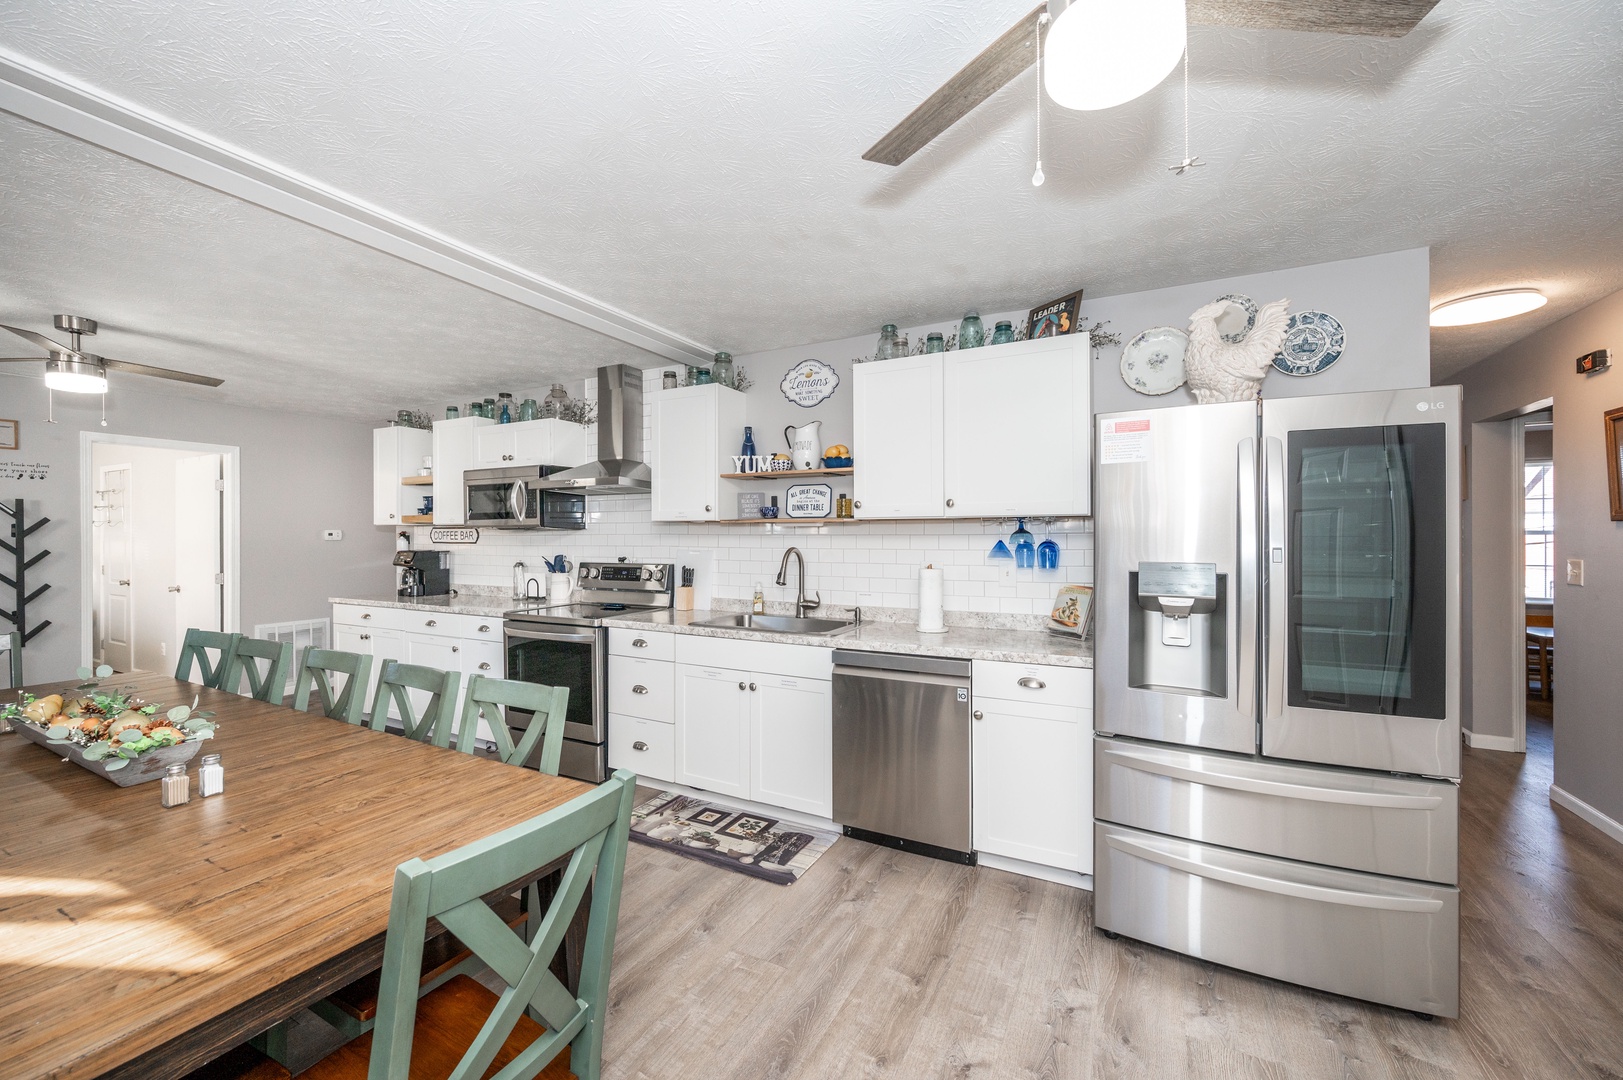 The expansive eat-in kitchen provides ample space and all the comforts of home